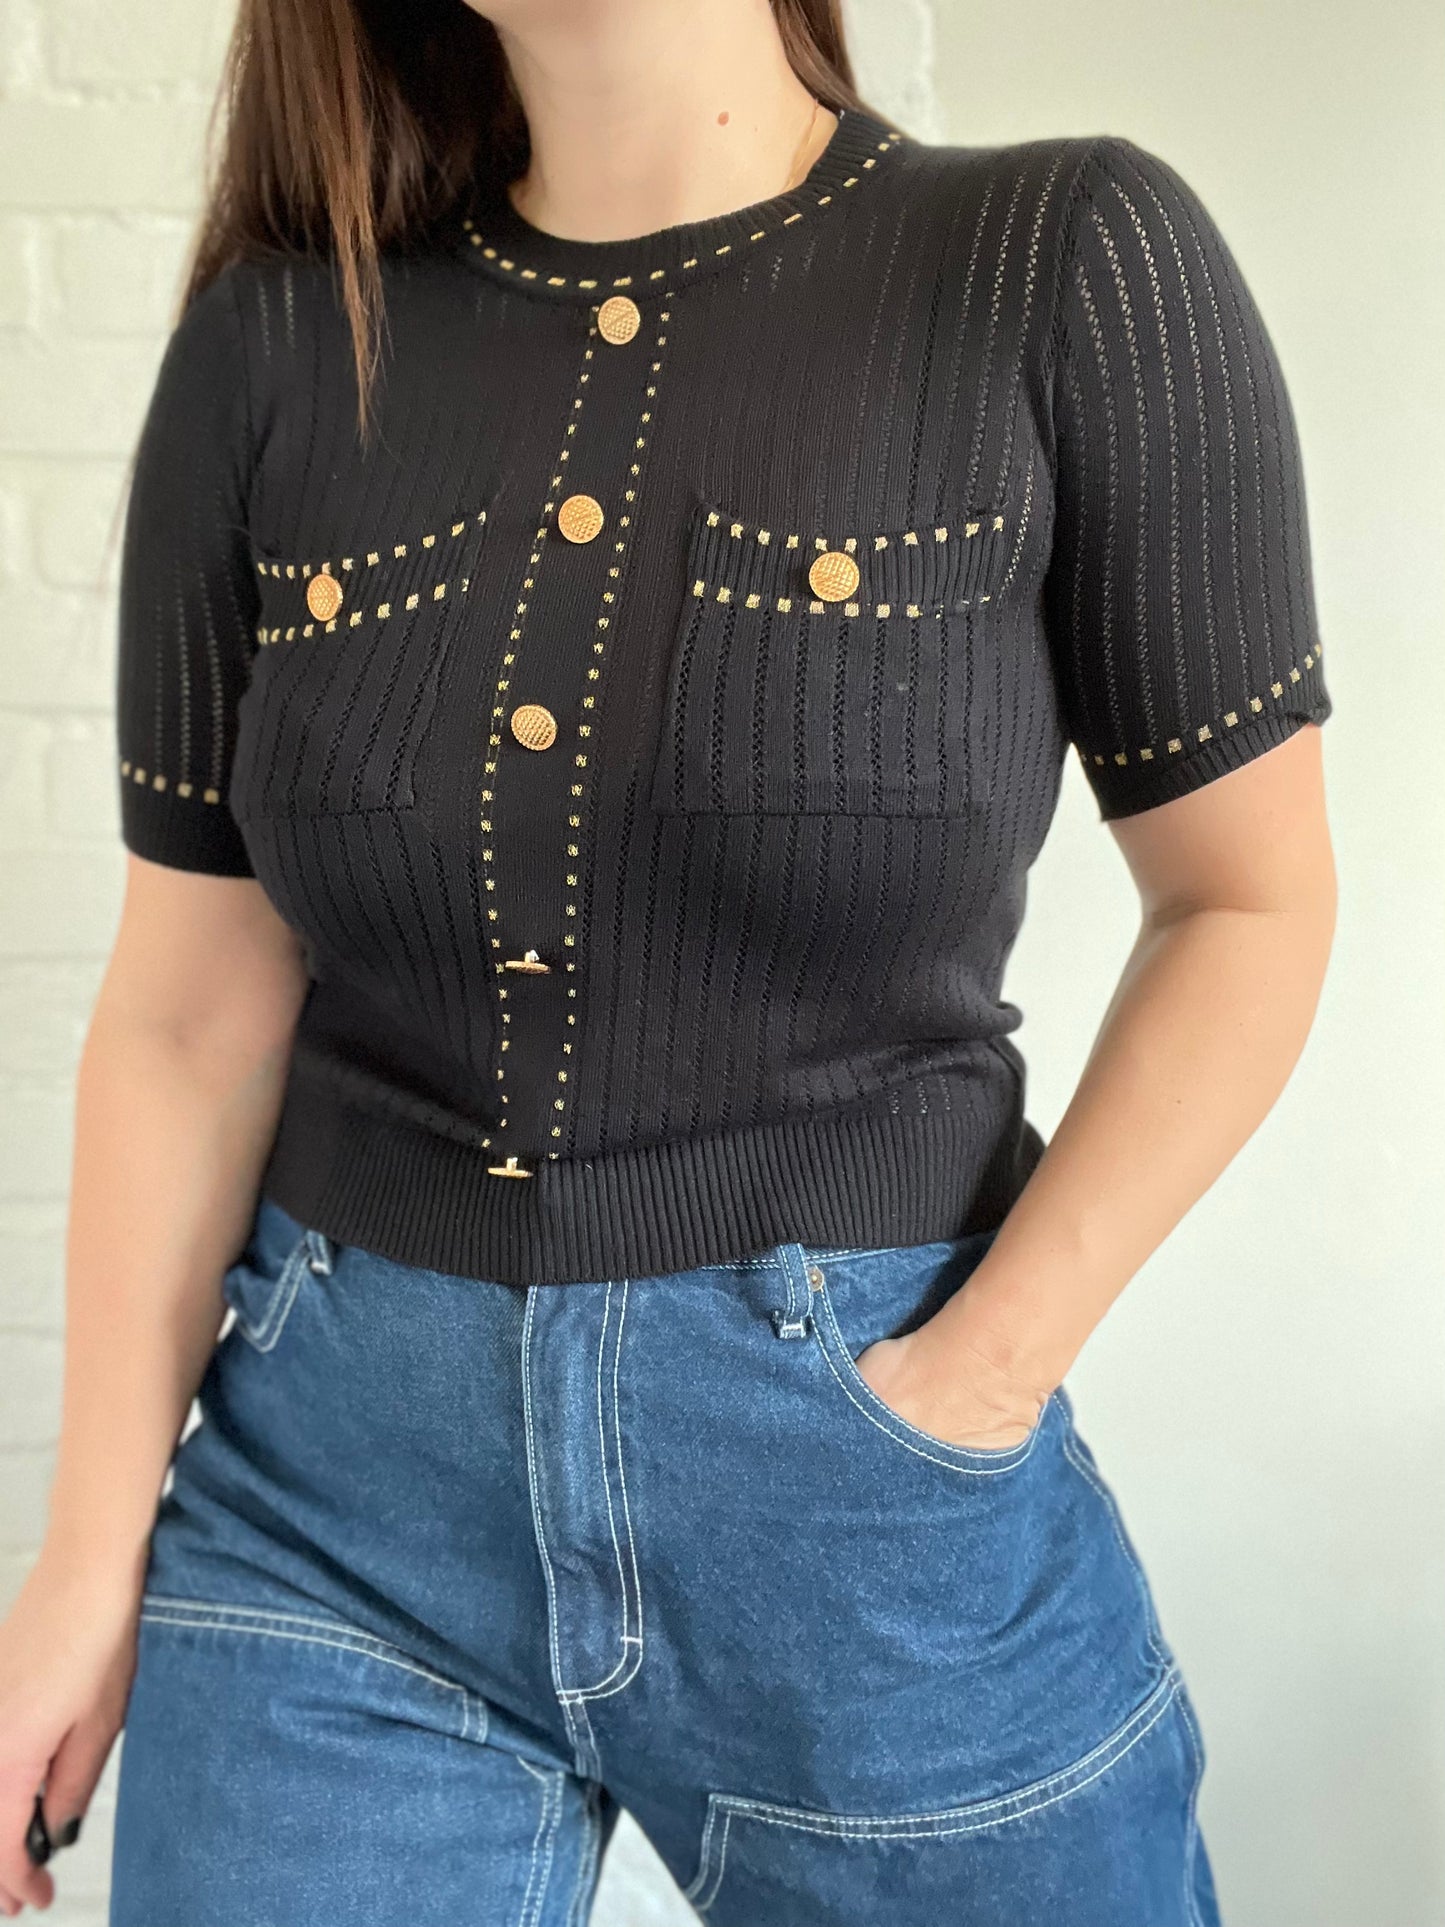 Chic Black & Gold Top - XS/S